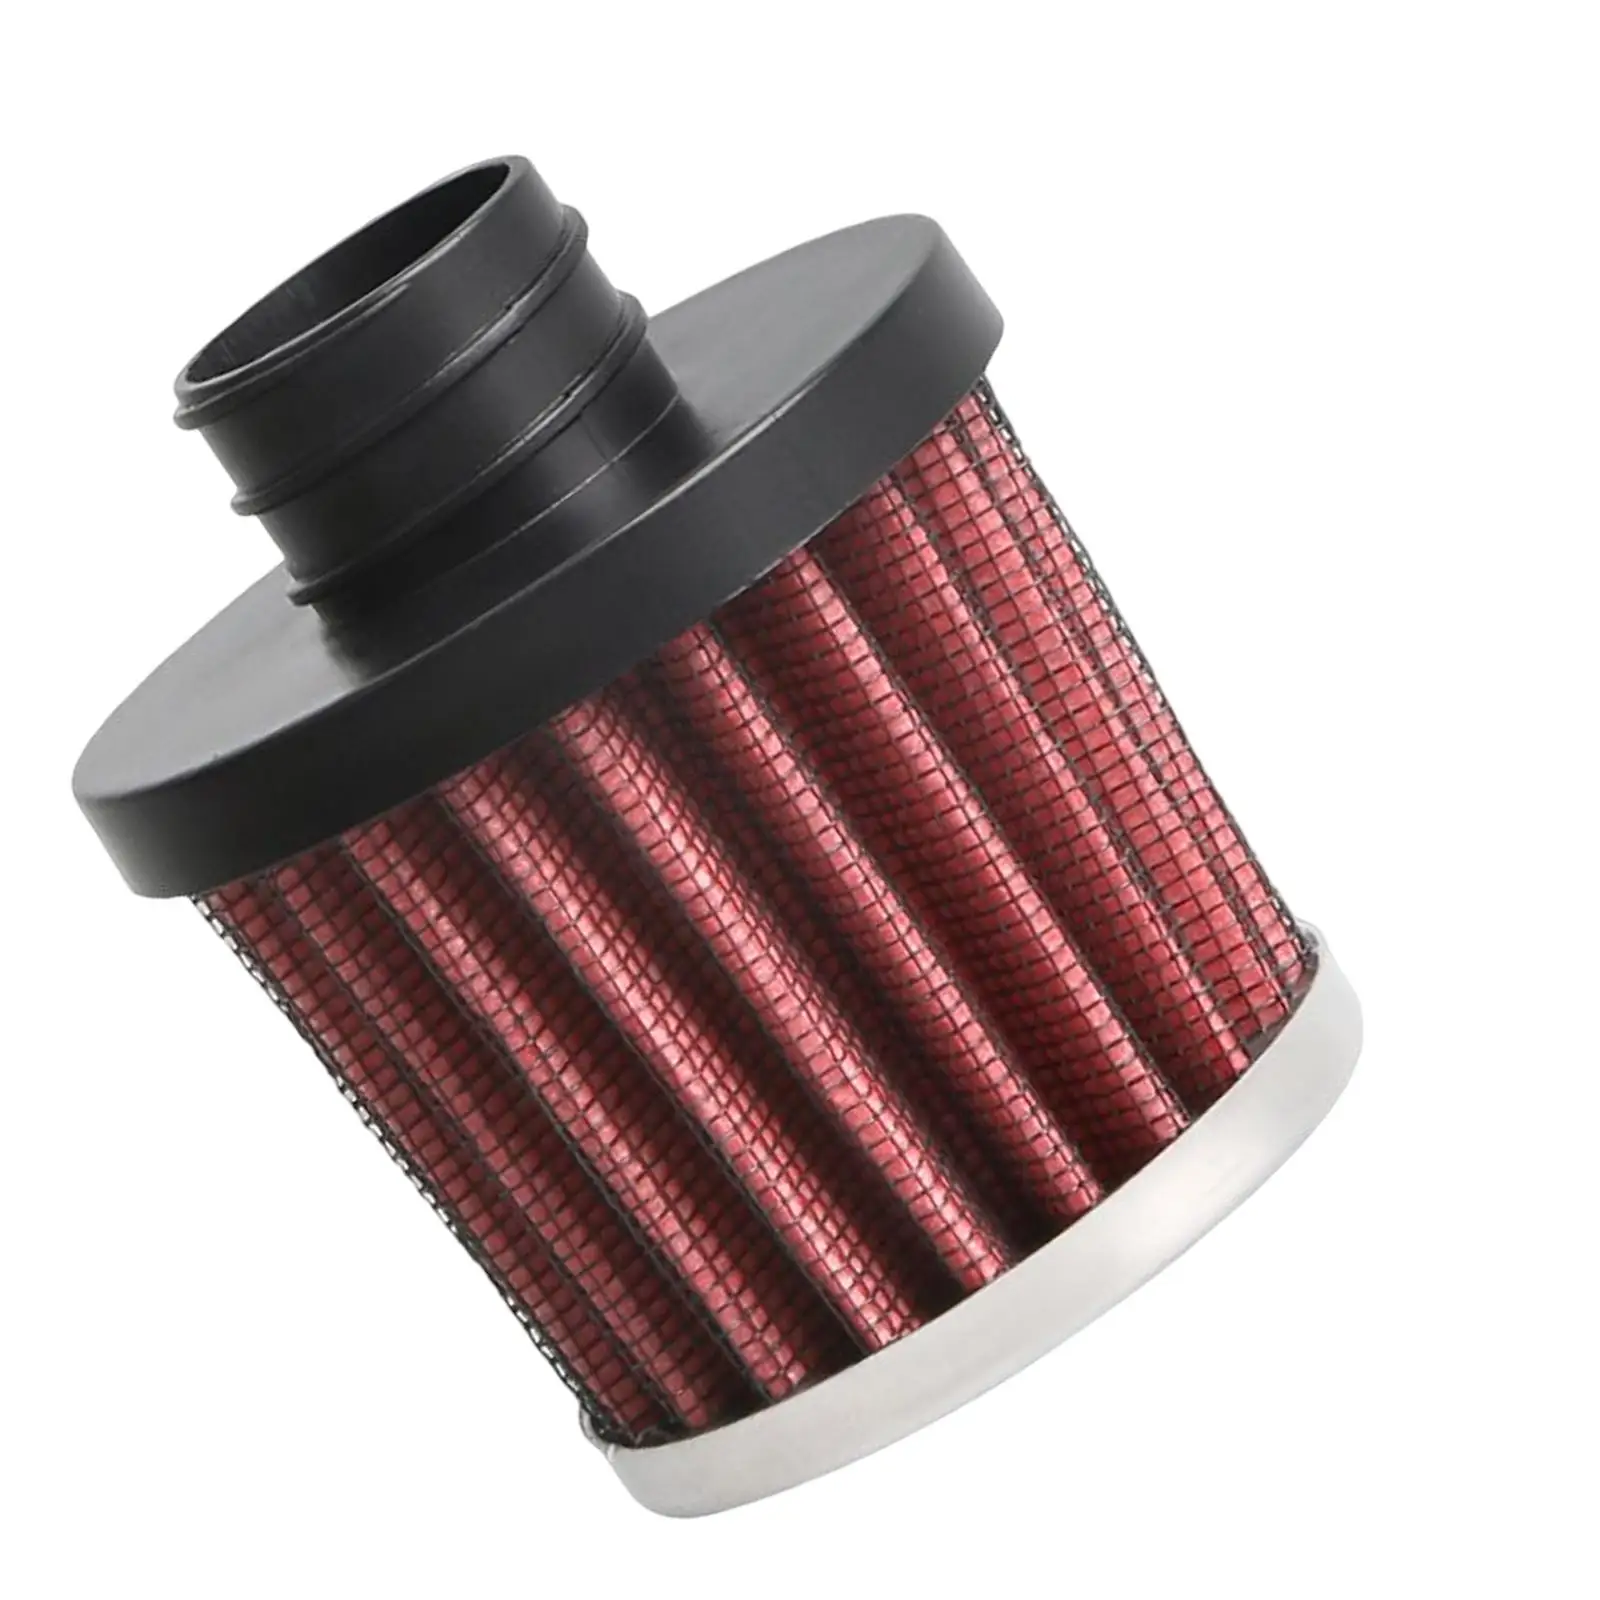 25mm Parking heating Air Filter Universal Heaters Accessories for Parking heating Replaces Automobile Spare Parts Premium